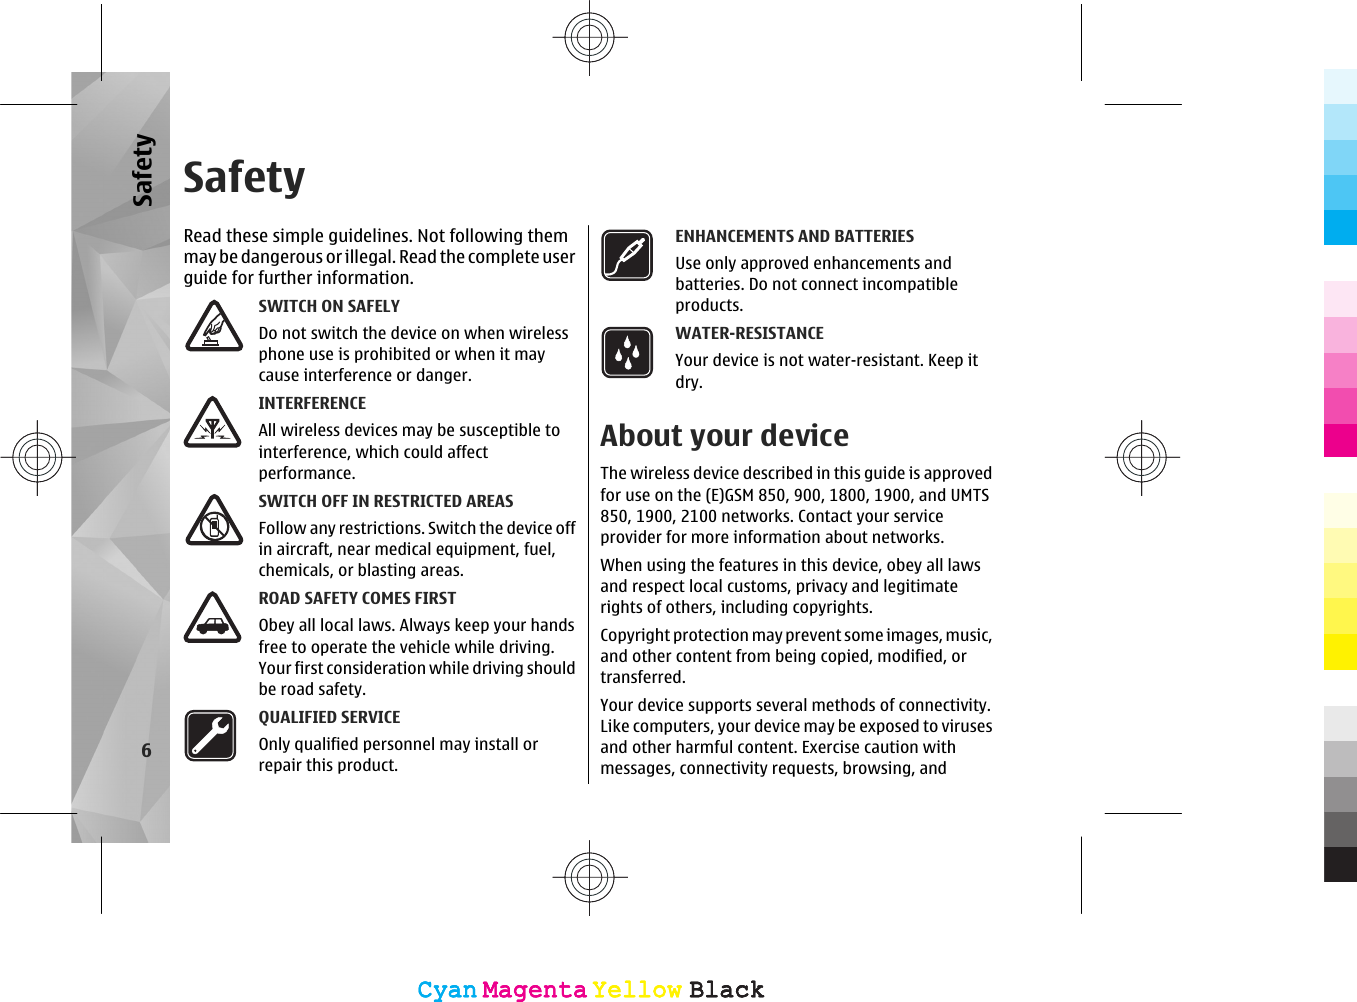 SafetyRead these simple guidelines. Not following themmay be dangerous or illegal. Read the co mplete userguide for further information.SWITCH ON SAFELYDo not switch the device on when wirelessphone use is prohibited or when it maycause interference or danger.INTERFERENCEAll wireless devices may be susceptible tointerference, which could affectperformance.SWITCH OFF IN RESTRICTED AREASFollow any restrictions. Switch the device offin aircraft, near medical equipment, fuel,chemicals, or blasting areas.ROAD SAFETY COMES FIRSTObey all local laws. Always keep your handsfree to operate the vehicle while driving.Your first consideration while driving shouldbe road safety.QUALIFIED SERVICEOnly qualified personnel may install orrepair this product.ENHANCEMENTS AND BATTERIESUse only approved enhancements andbatteries. Do not connect incompatibleproducts.WATER-RESISTANCEYour device is not water-resistant. Keep itdry.About your deviceThe wireless device described in this guide is approvedfor use on the (E)GSM 850, 900, 1800, 1900, and UMTS850, 1900, 2100 networks. Contact your serviceprovider for more information about networks.When using the features in this device, obey all lawsand respect local customs, privacy and legitimaterights of others, including copyrights.Copyright protection may prevent some images, music,and other content from being copied, modified, ortransferred.Your device supports several methods of connectivity.Like computers, your device may be exposed to virusesand other harmful content. Exercise caution withmessages, connectivity requests, browsing, and6SafetyCyanCyanMagentaMagentaYellowYellowBlackBlackCyanCyanMagentaMagentaYellowYellowBlackBlack